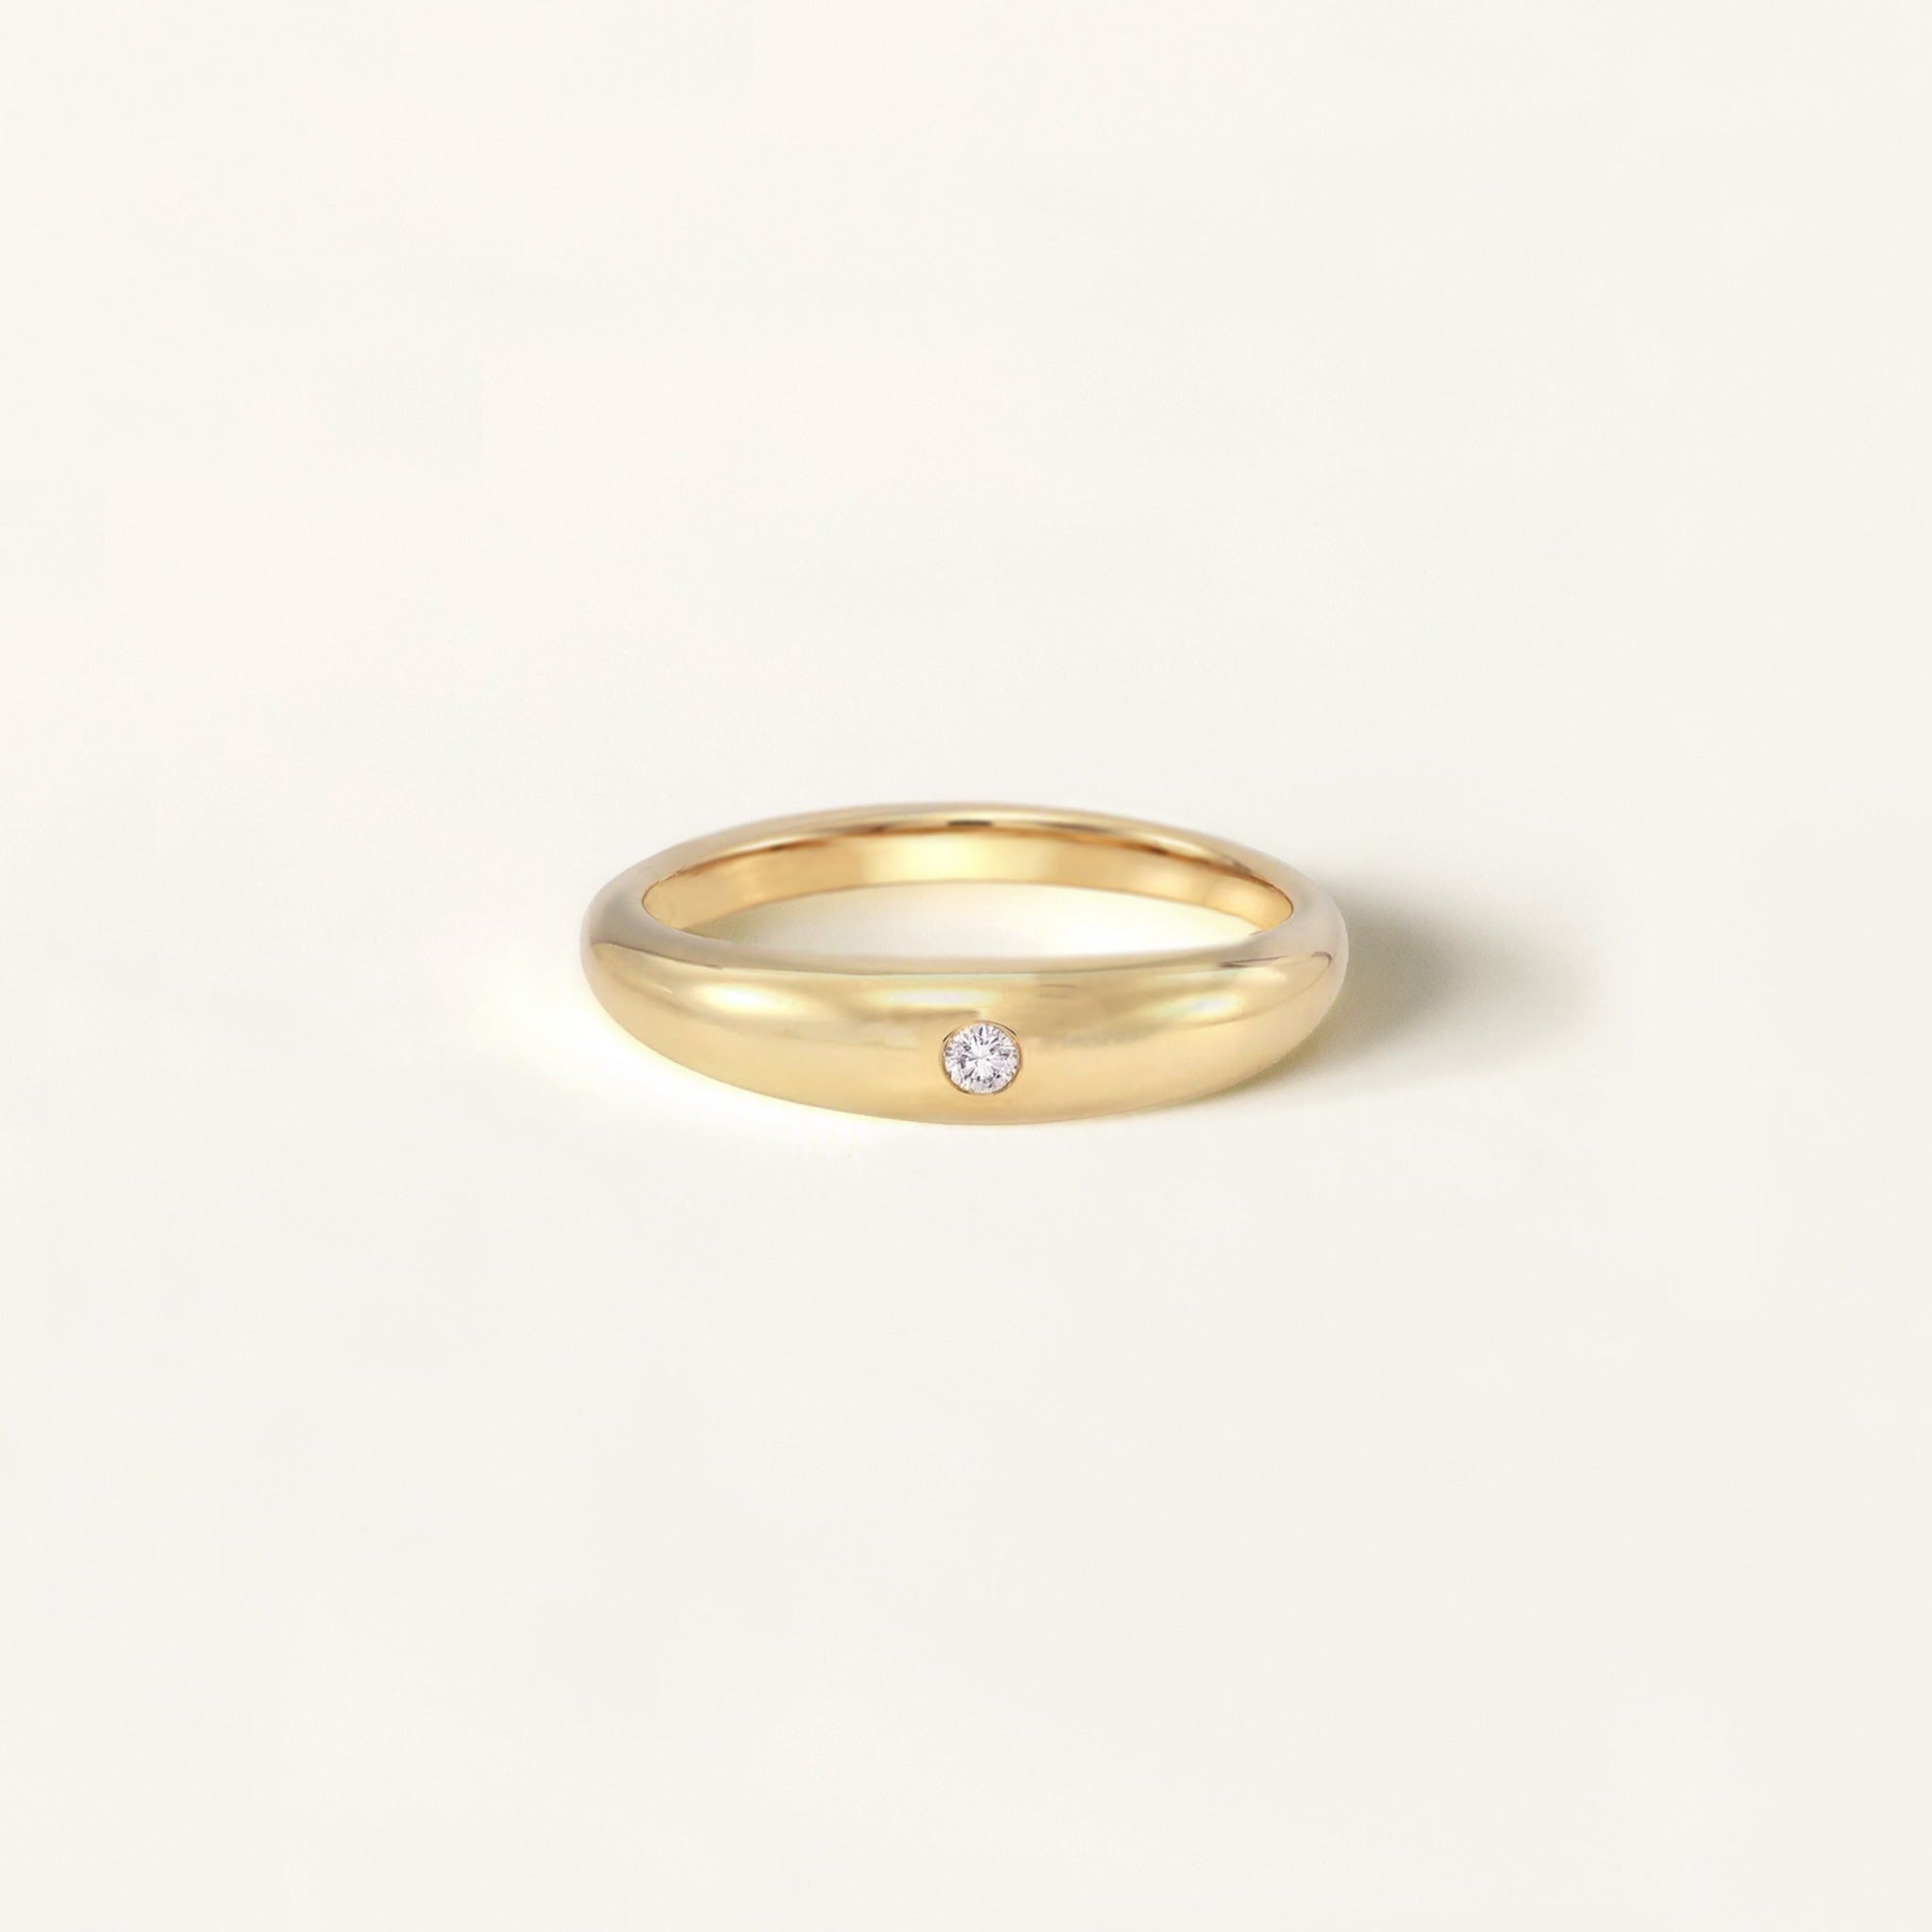 Smooth 14k gold dome ring with a flush set diamond. Responsibly sourced diamond and recycled 14k yellow gold.